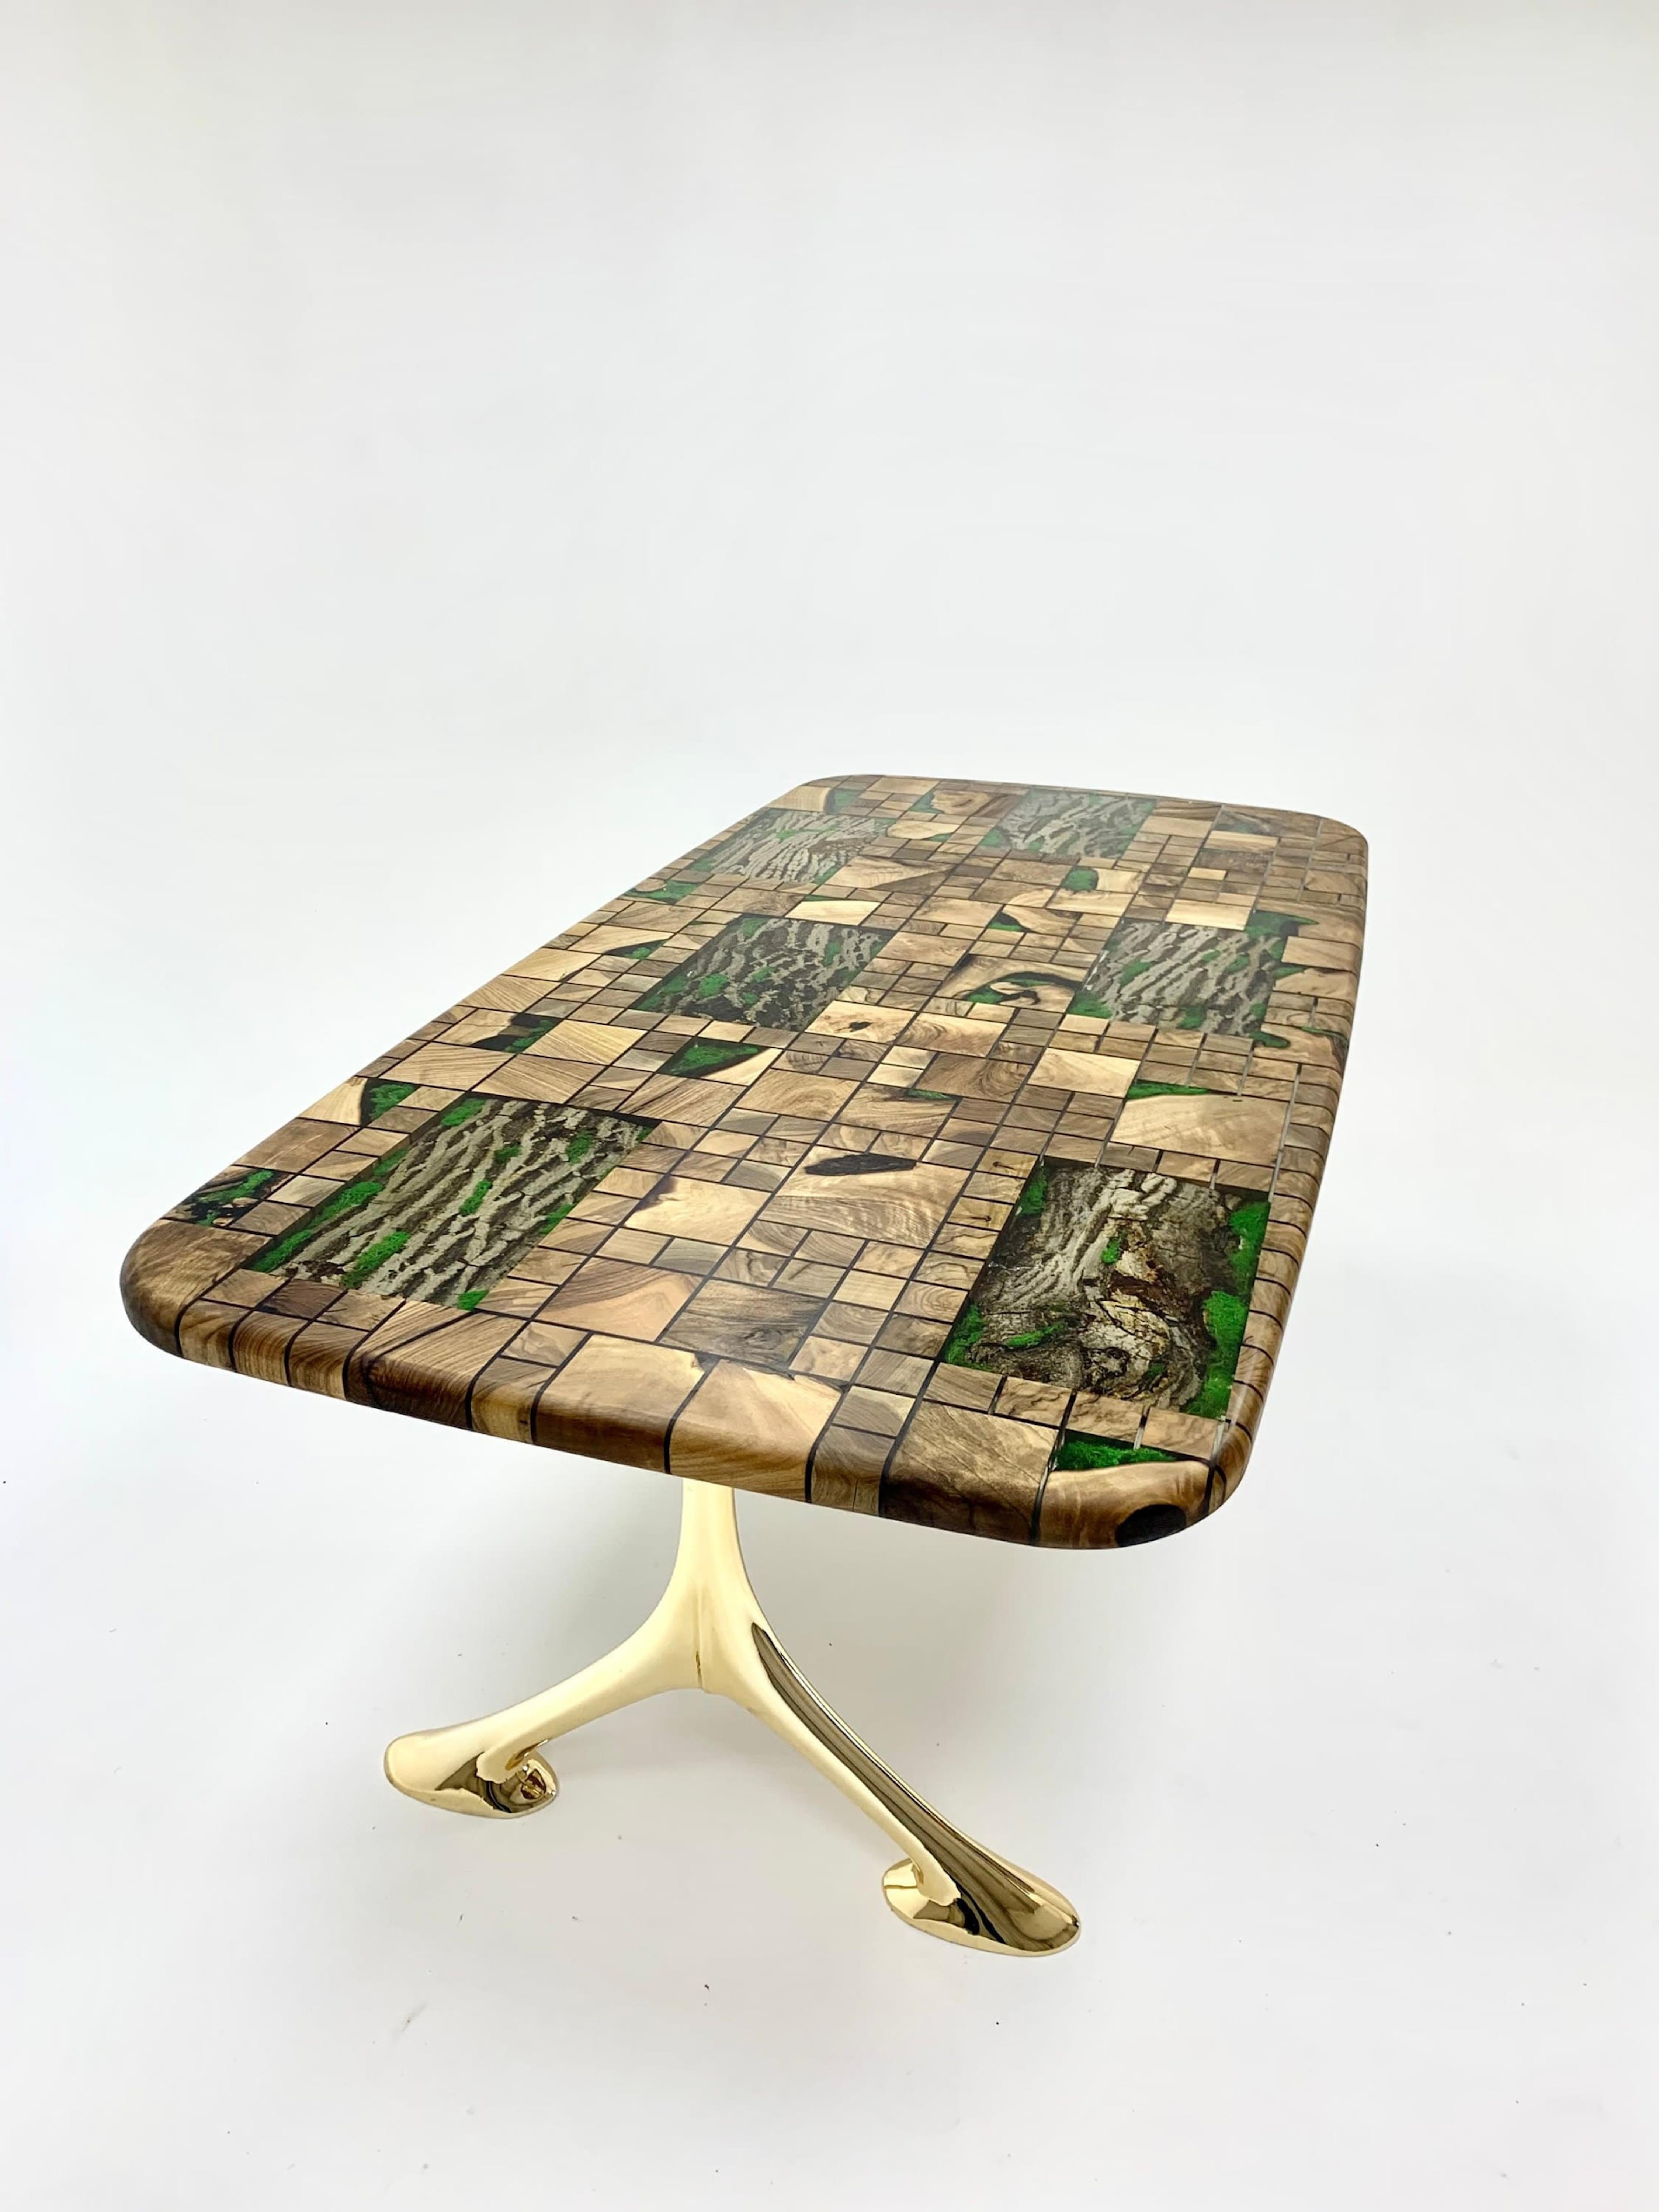 Forest Design Custom Clear Epoxy Resin Dining & Conference Room Table 

This table is made of 5 different pieces of wood. The grains and texture of the woods describe what a forest looks like.
It can be used as a dining table or as a conference